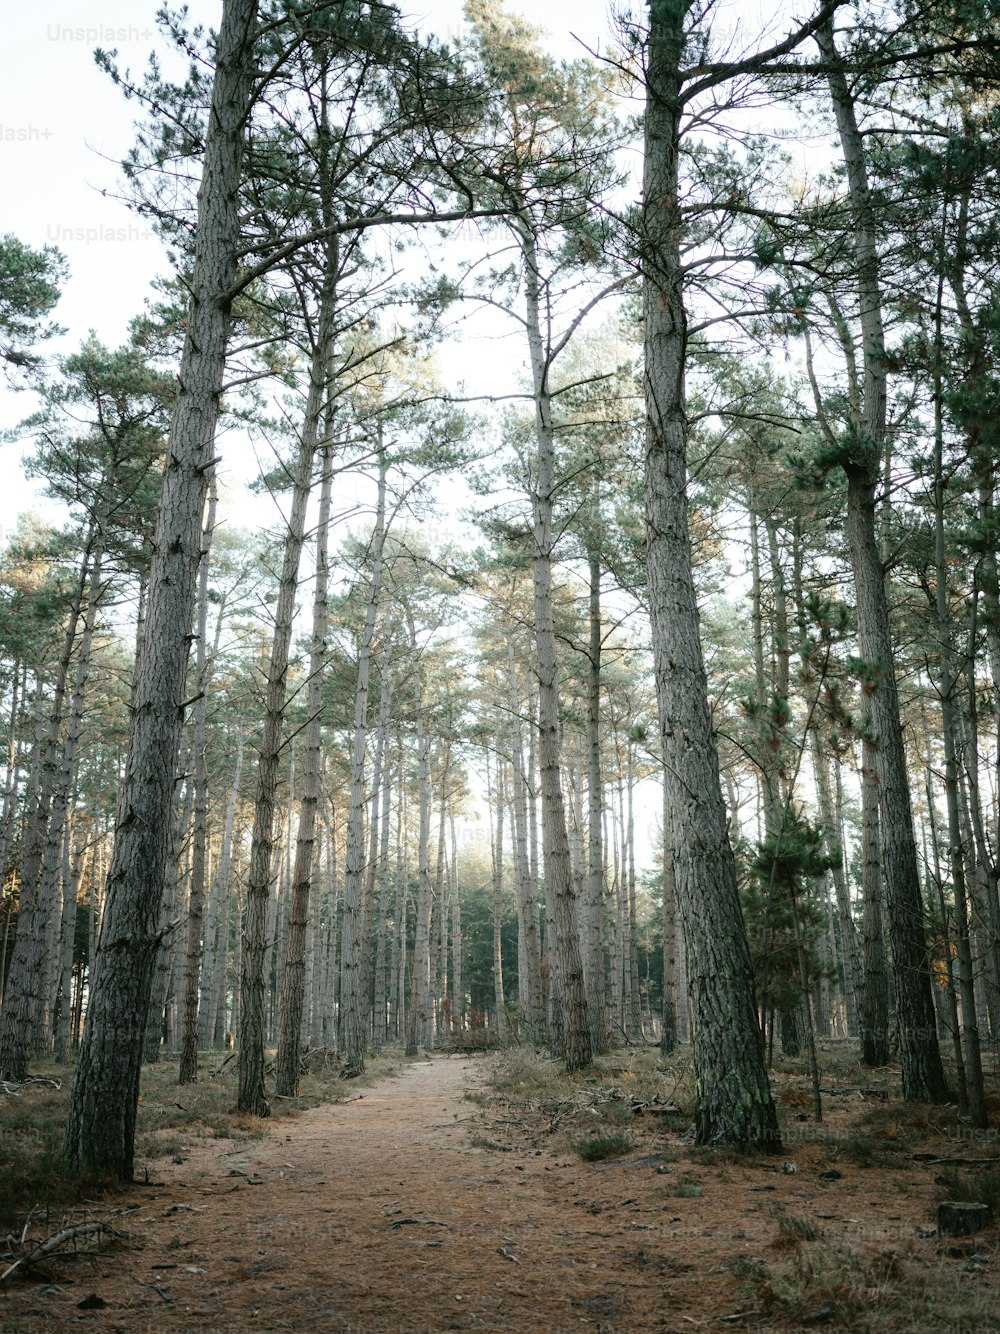 a dirt road surrounded by tall pine trees